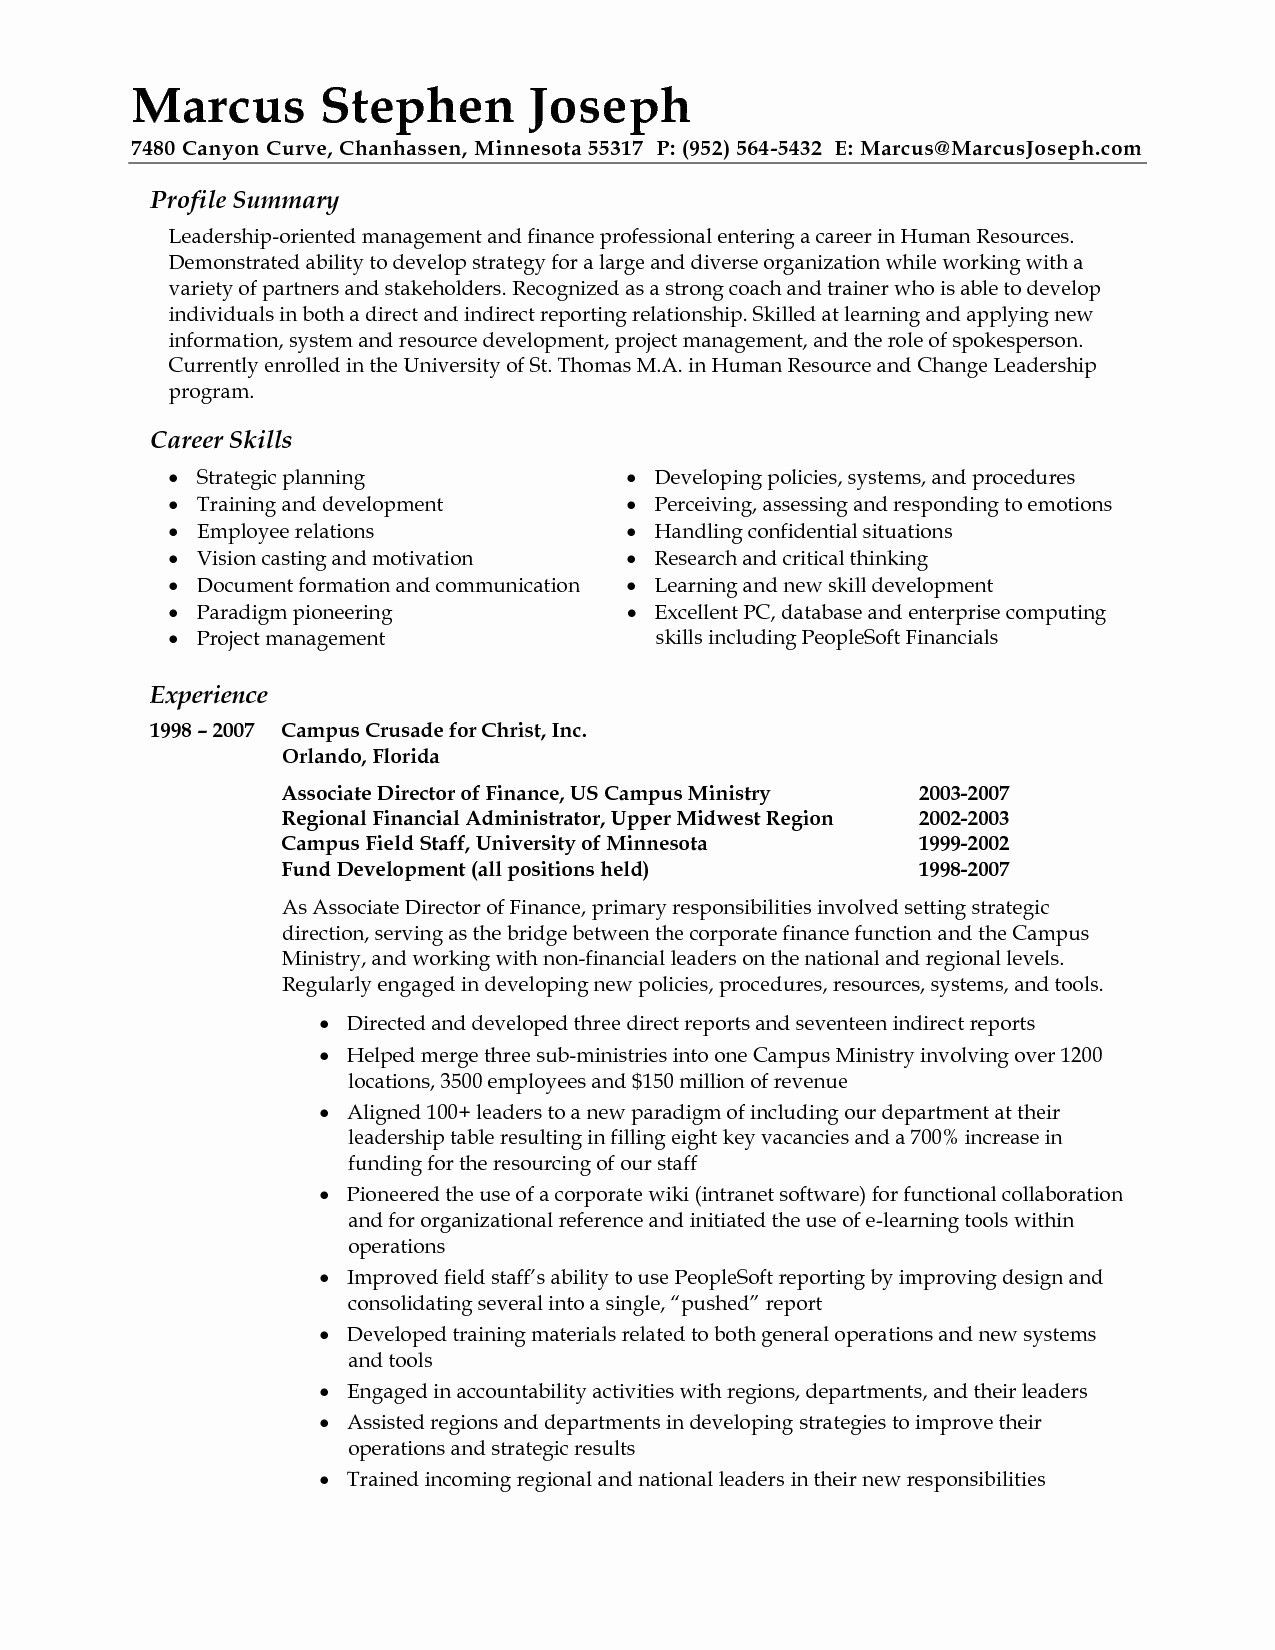 Sample Of Professional Profile On Resume Resume Examples with Summary , #examples #resume #resumeexamples …